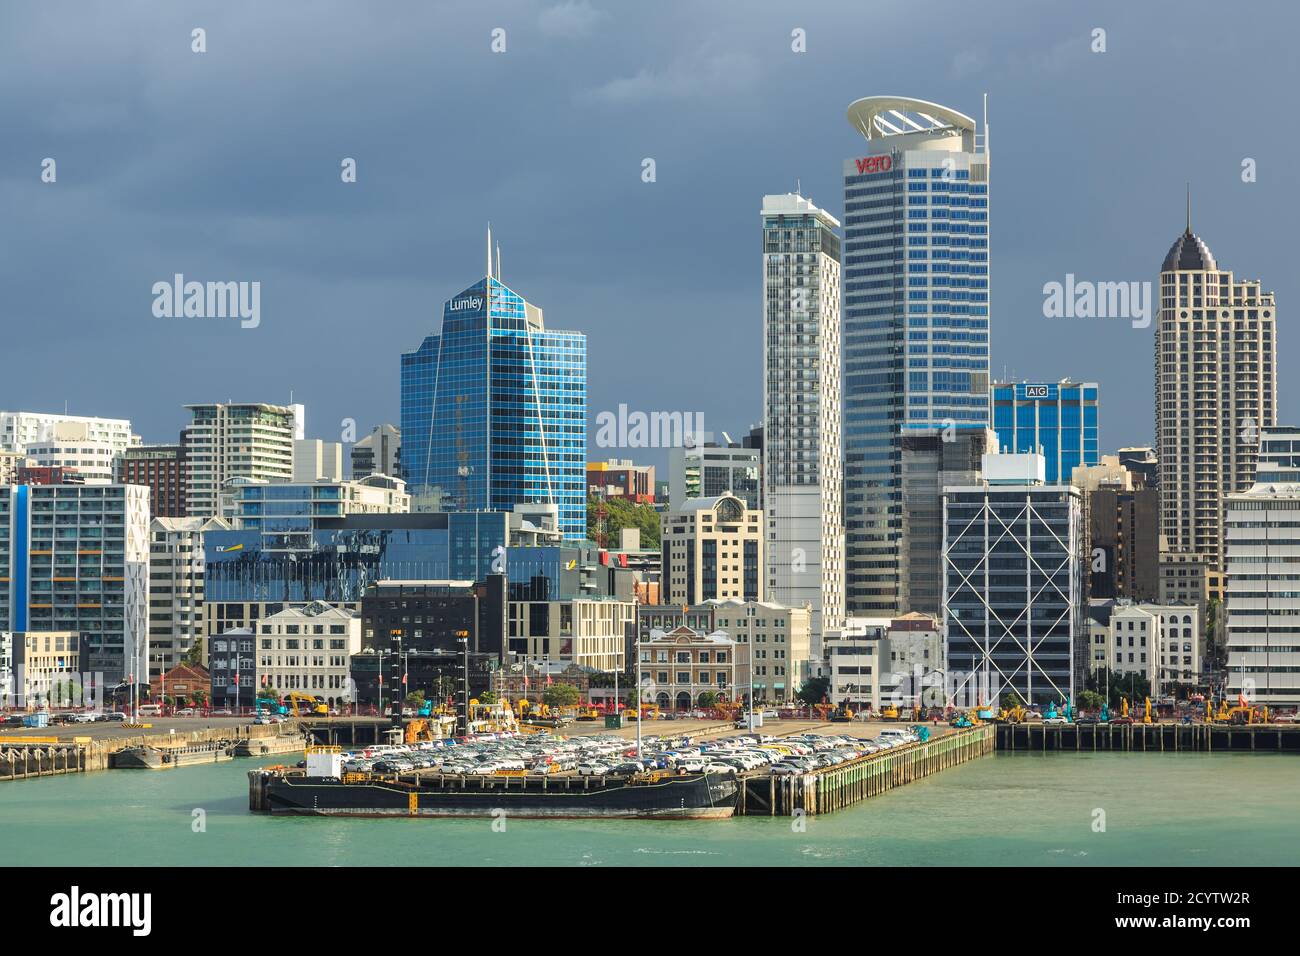 Skyscrapers of the Auckland, New Zealand central business district, seen from the harbor. March 21 2018 Stock Photo